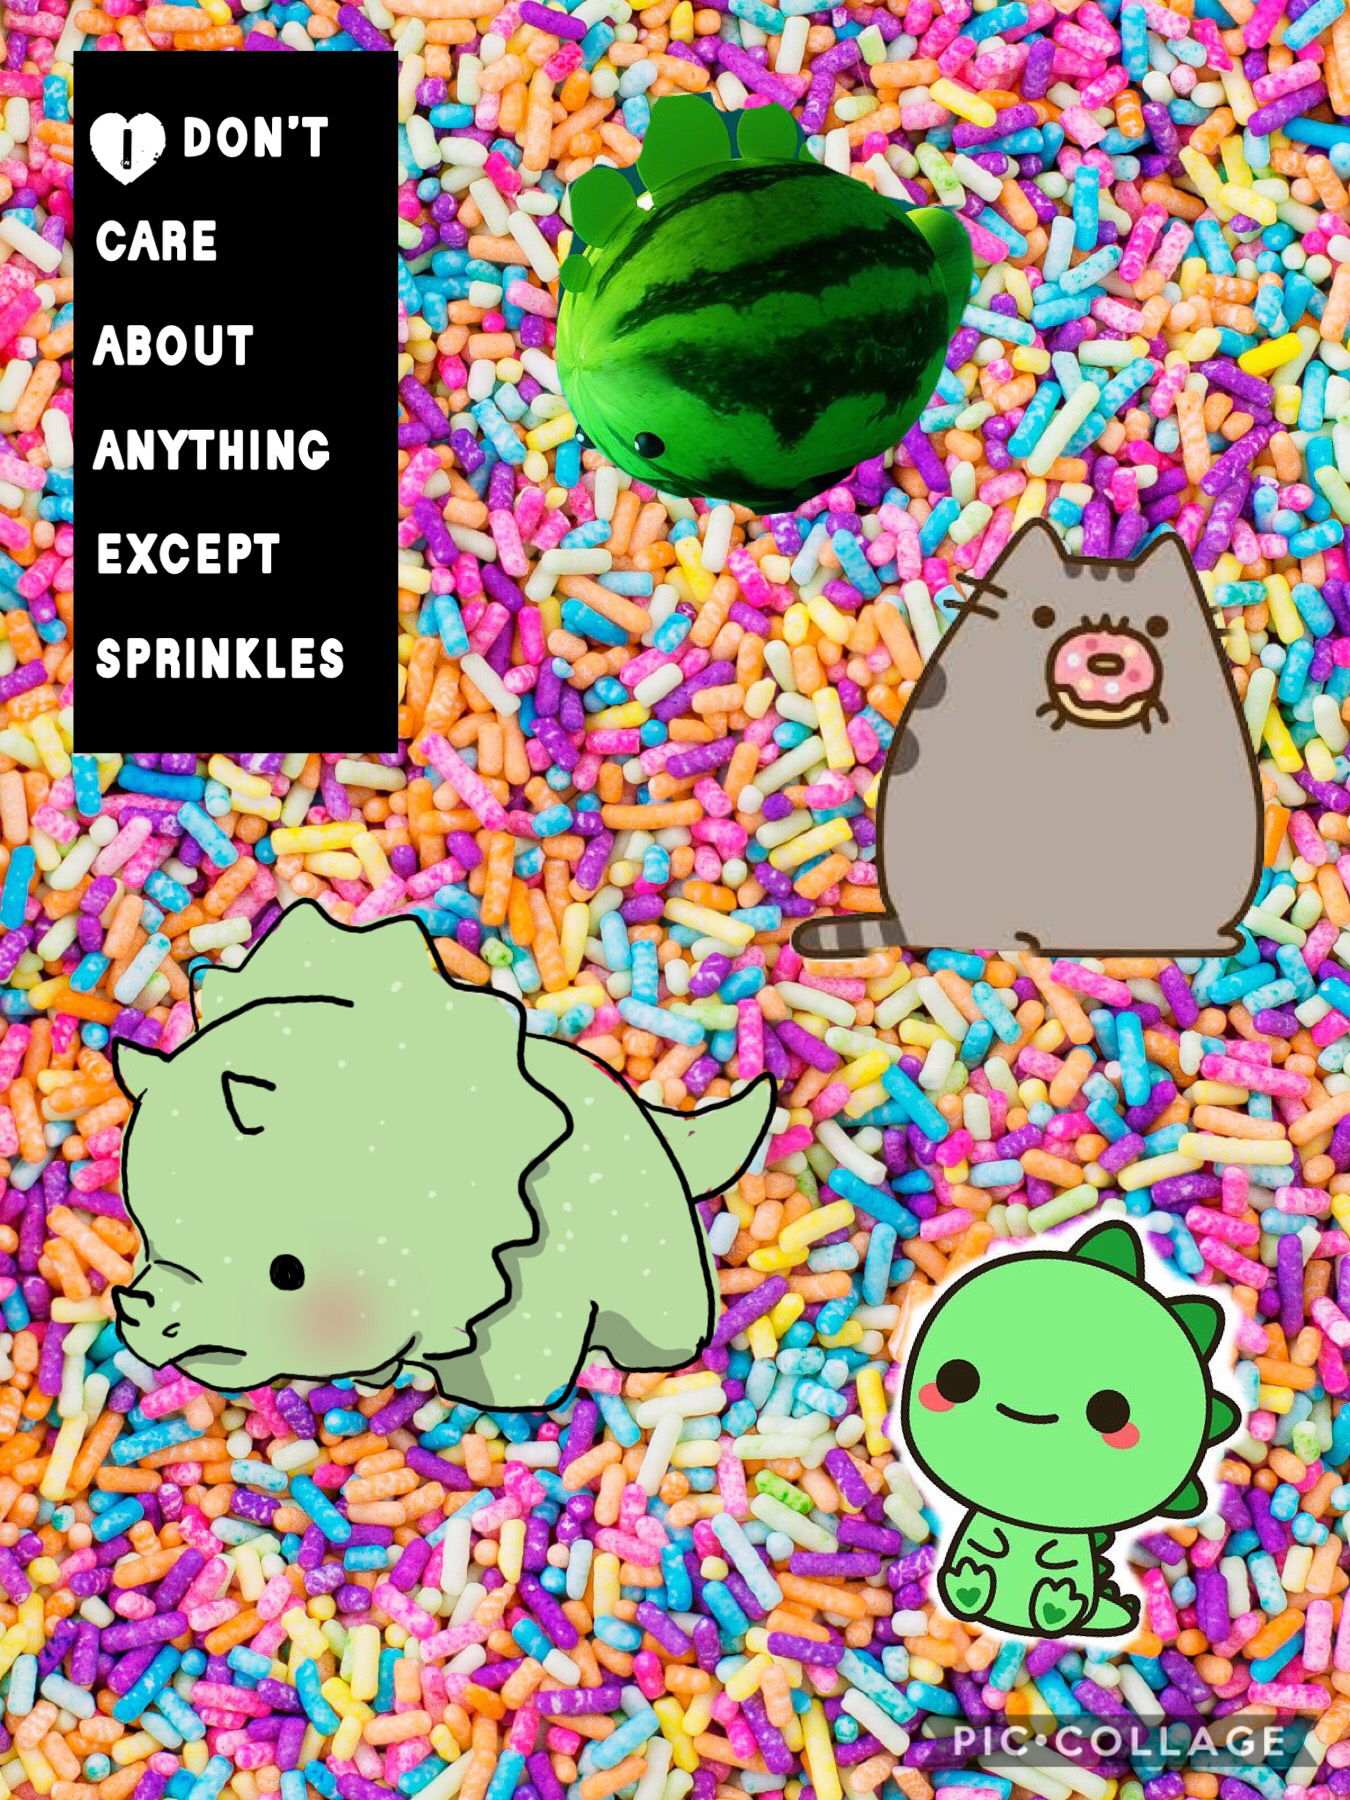 I don’t care about anything except SPRINKLES! Give this a big like and share it with ur friends!